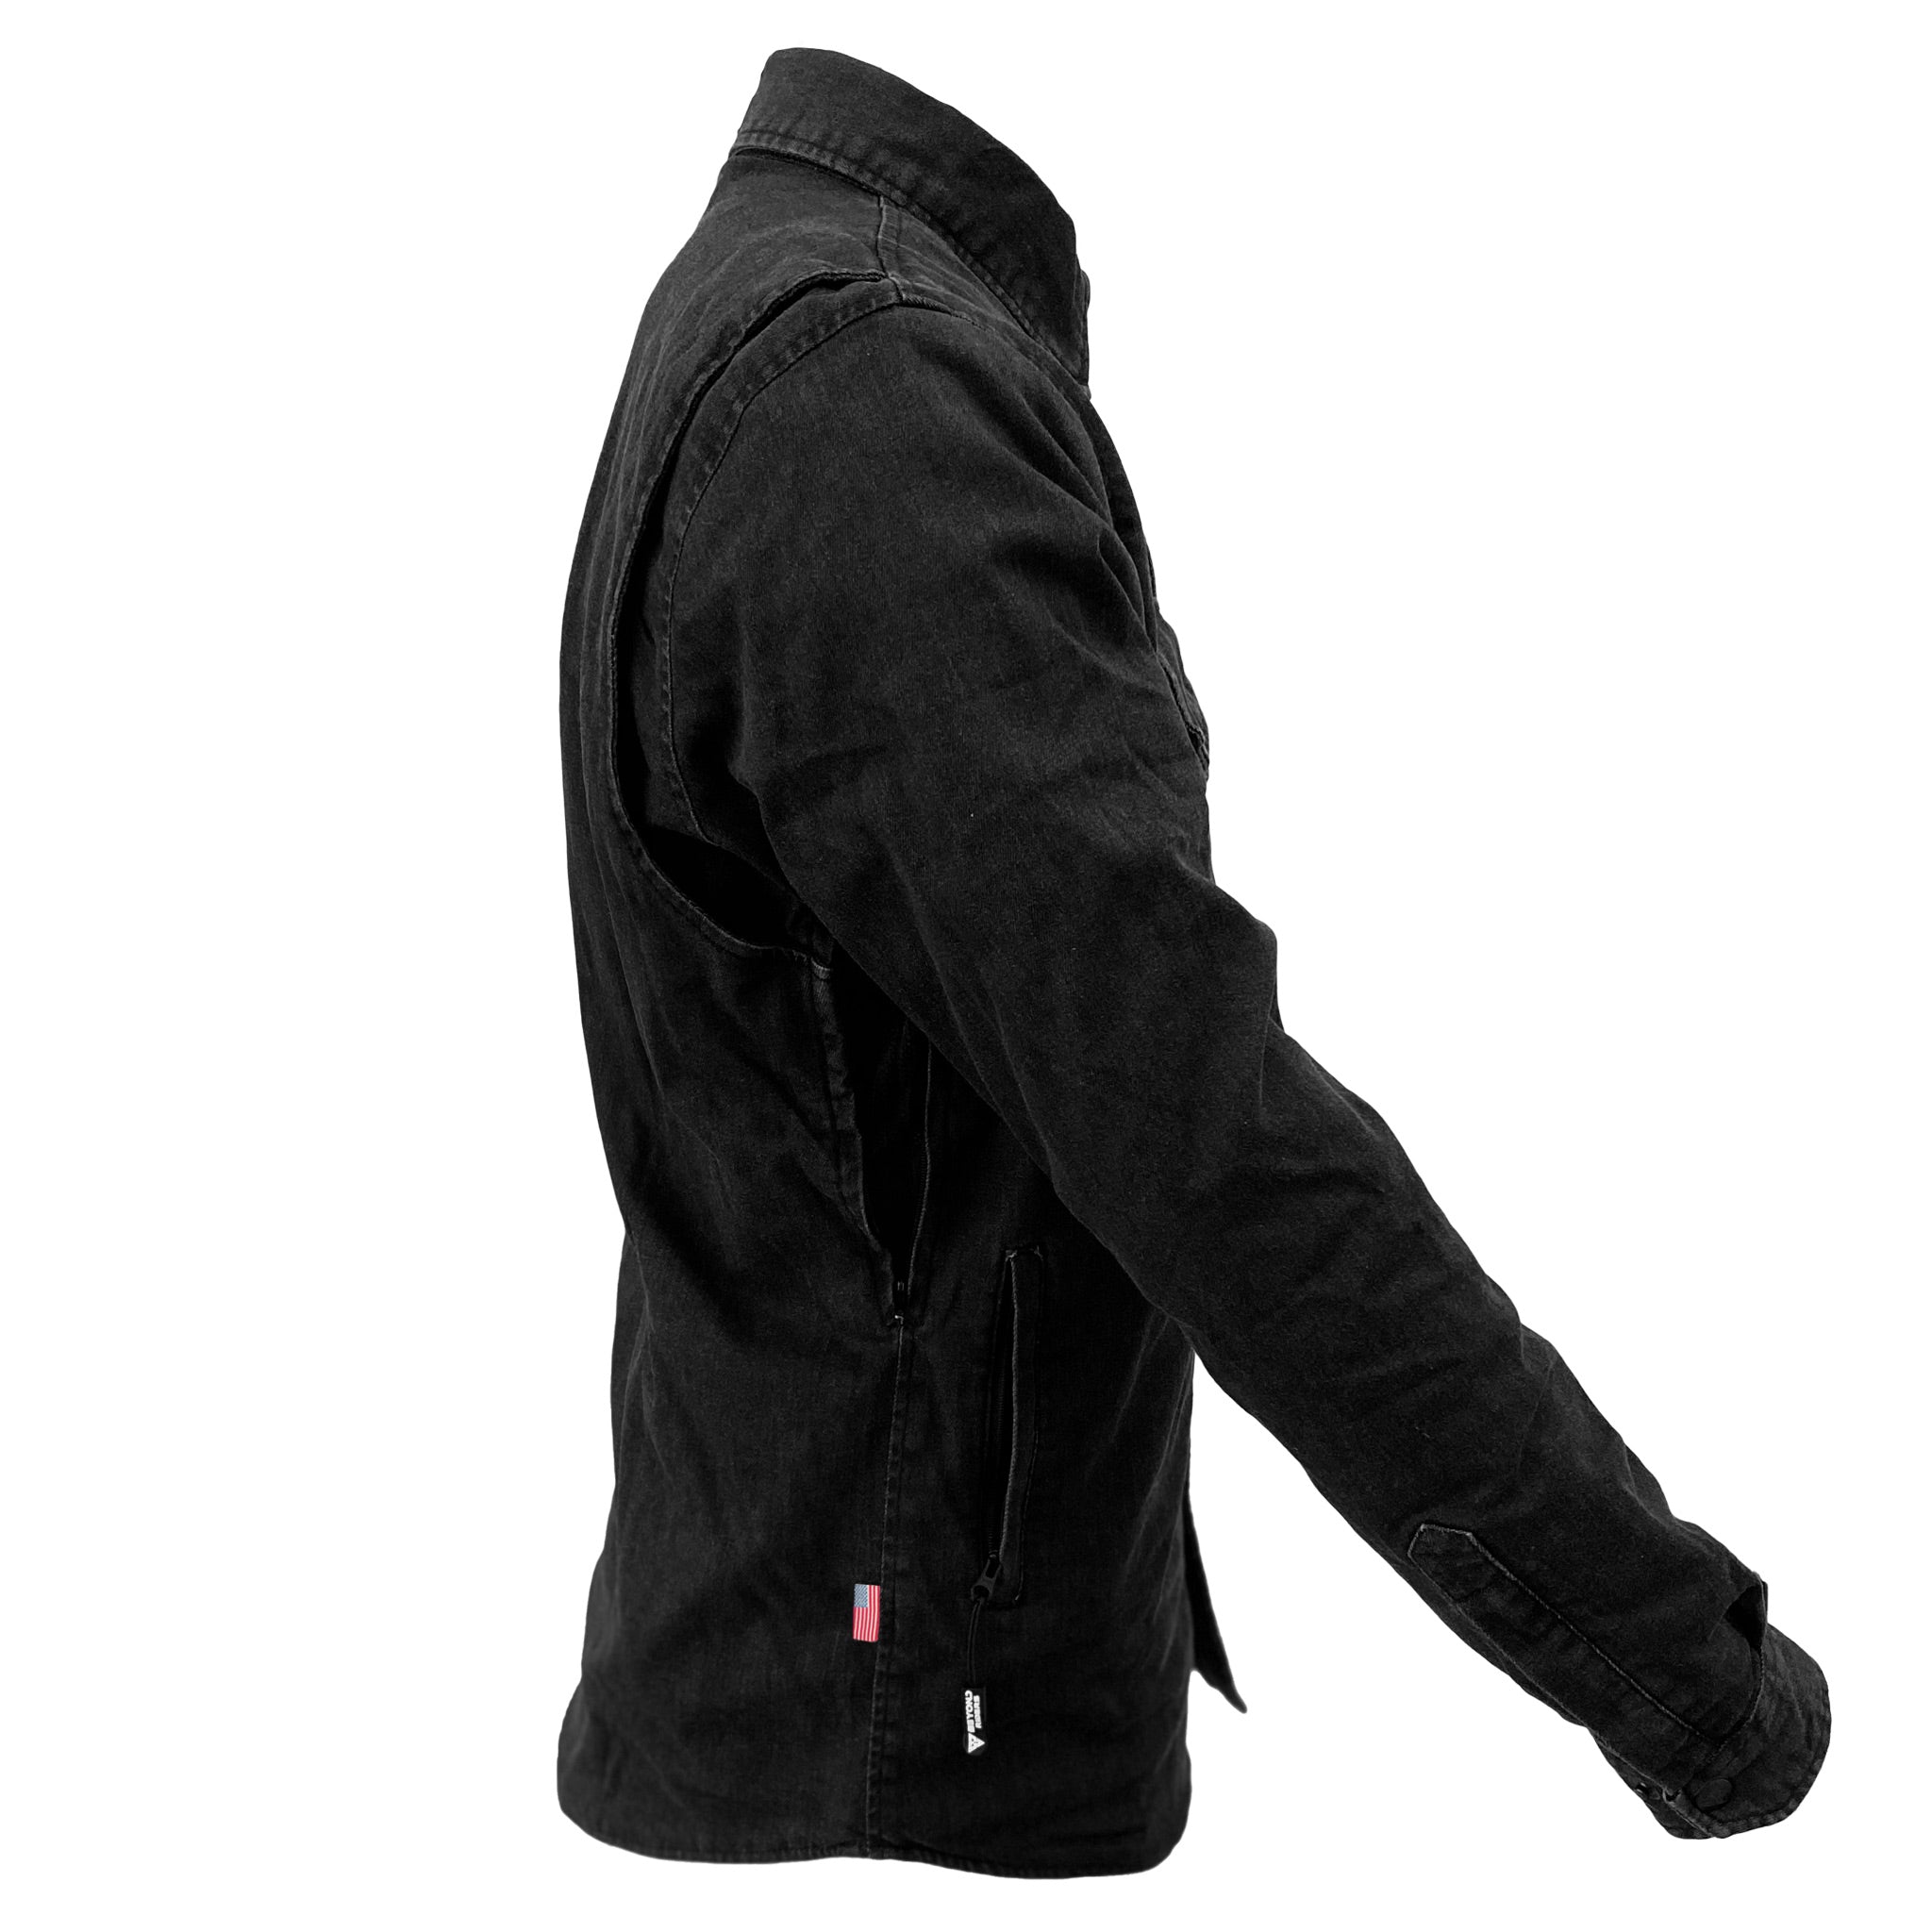 Protective Jeans Jacket - Black with Pads